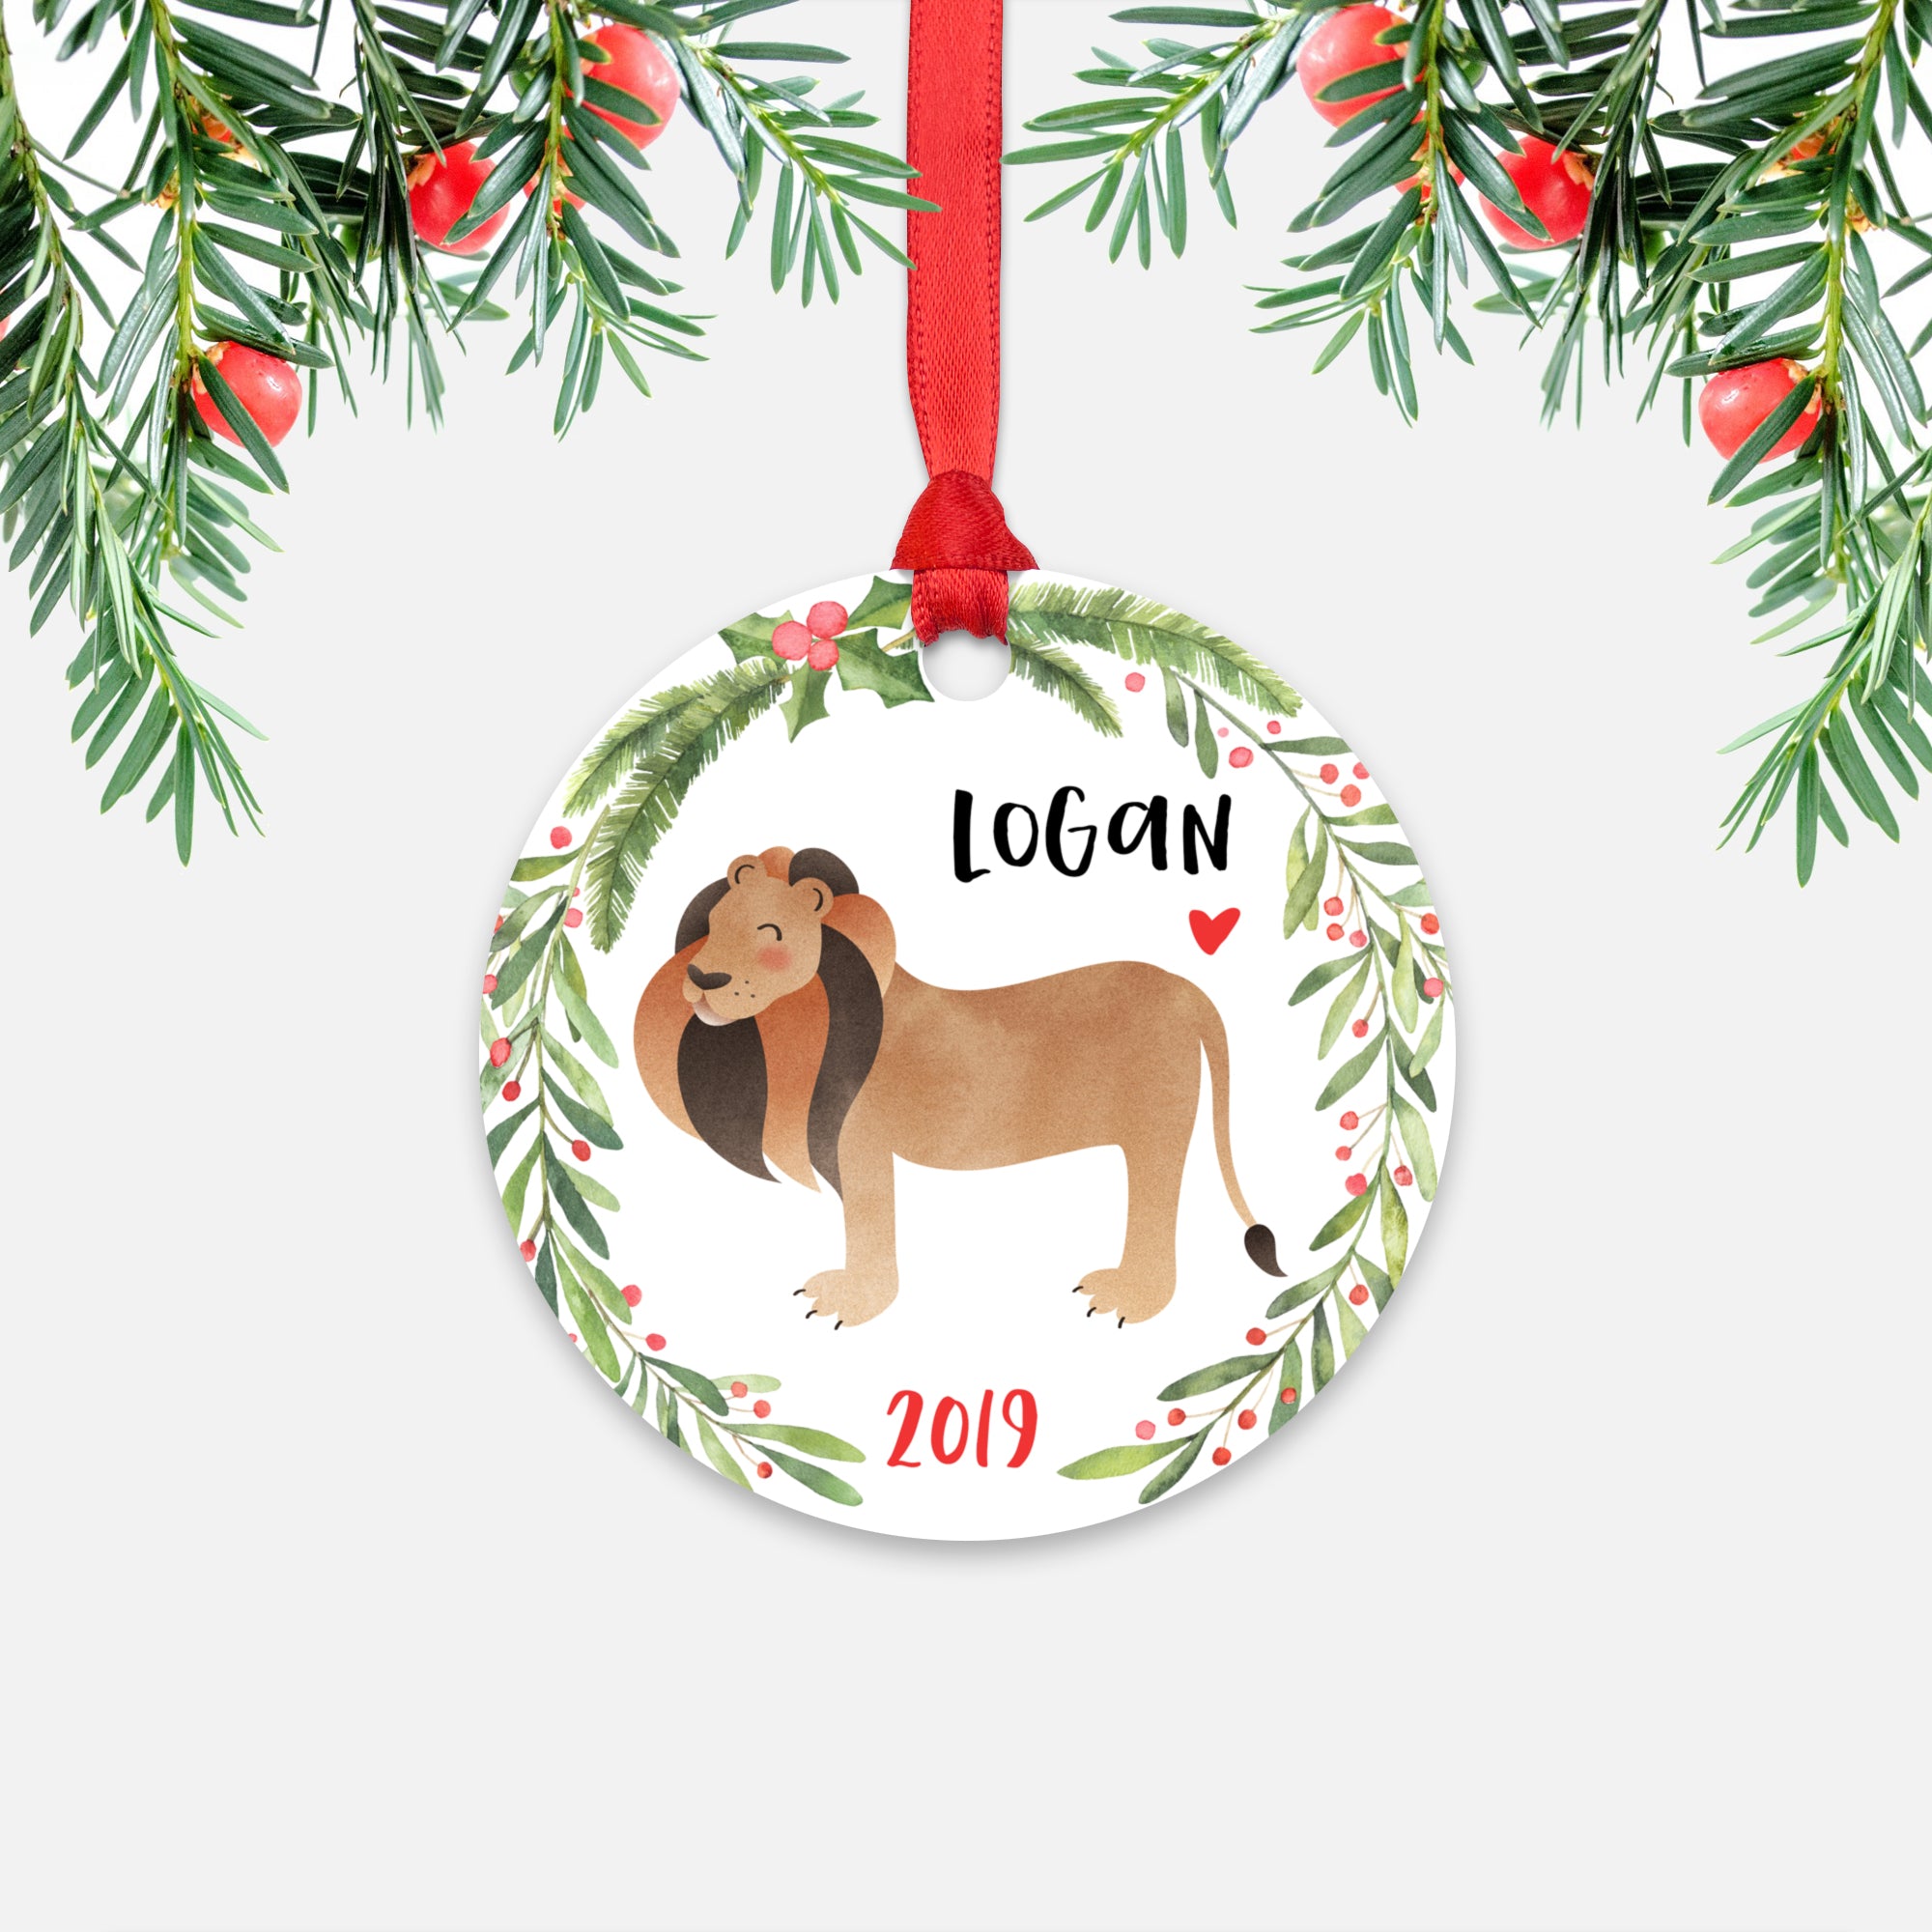 Lion Safari Animal Personalized Kids Name Christmas Ornament for Boy or Girl - Round Aluminum - Red ribbon